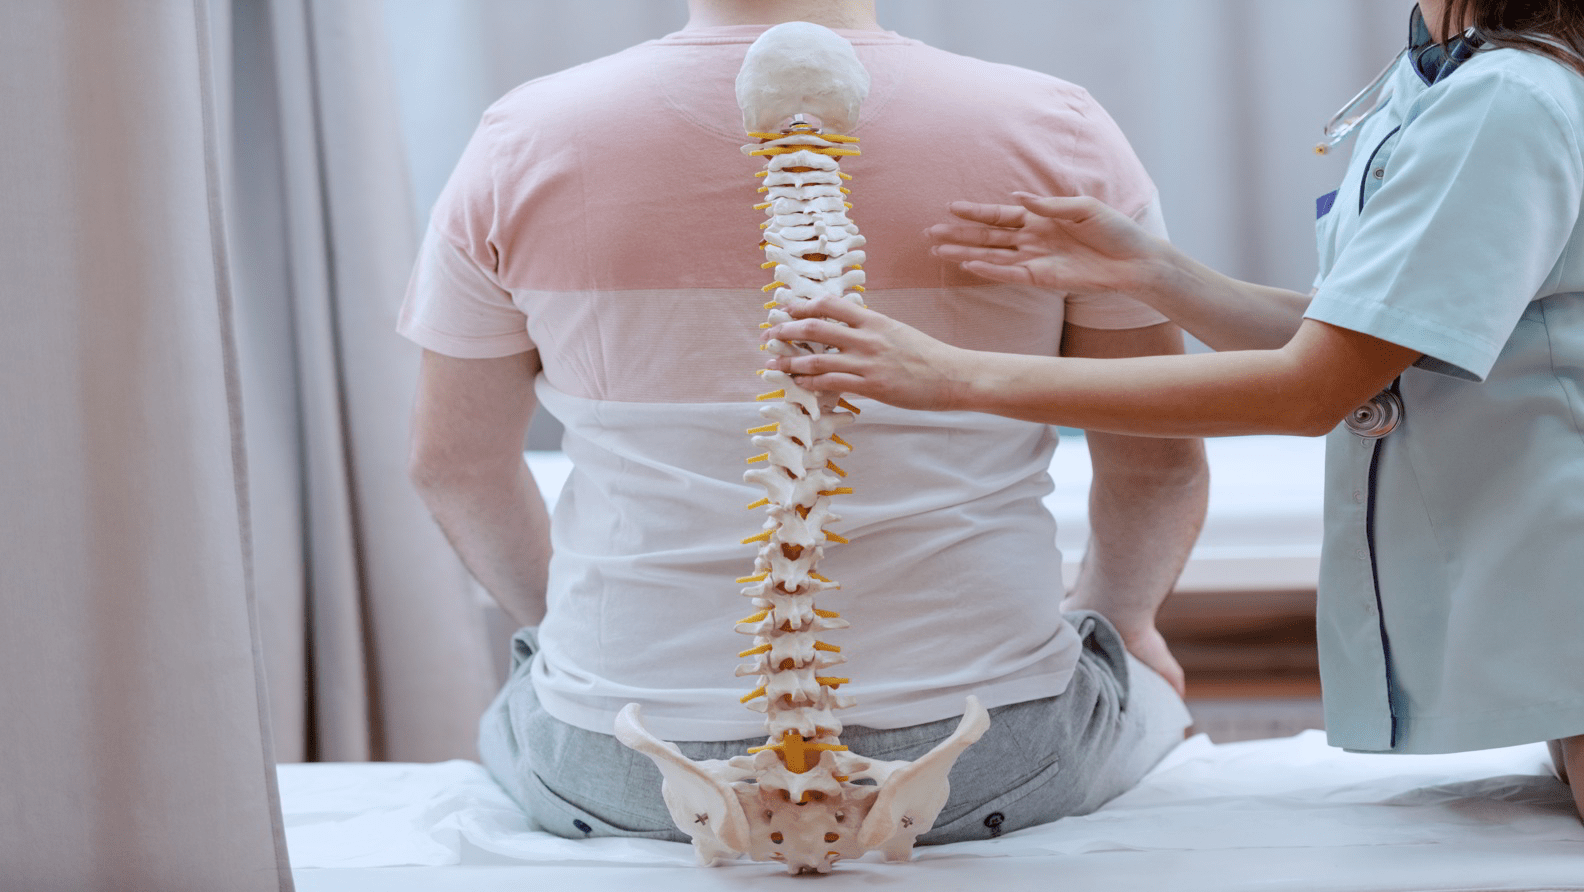 5 Signs It’s Time To See A Spine Specialist: Don’t Ignore These Warning Signals